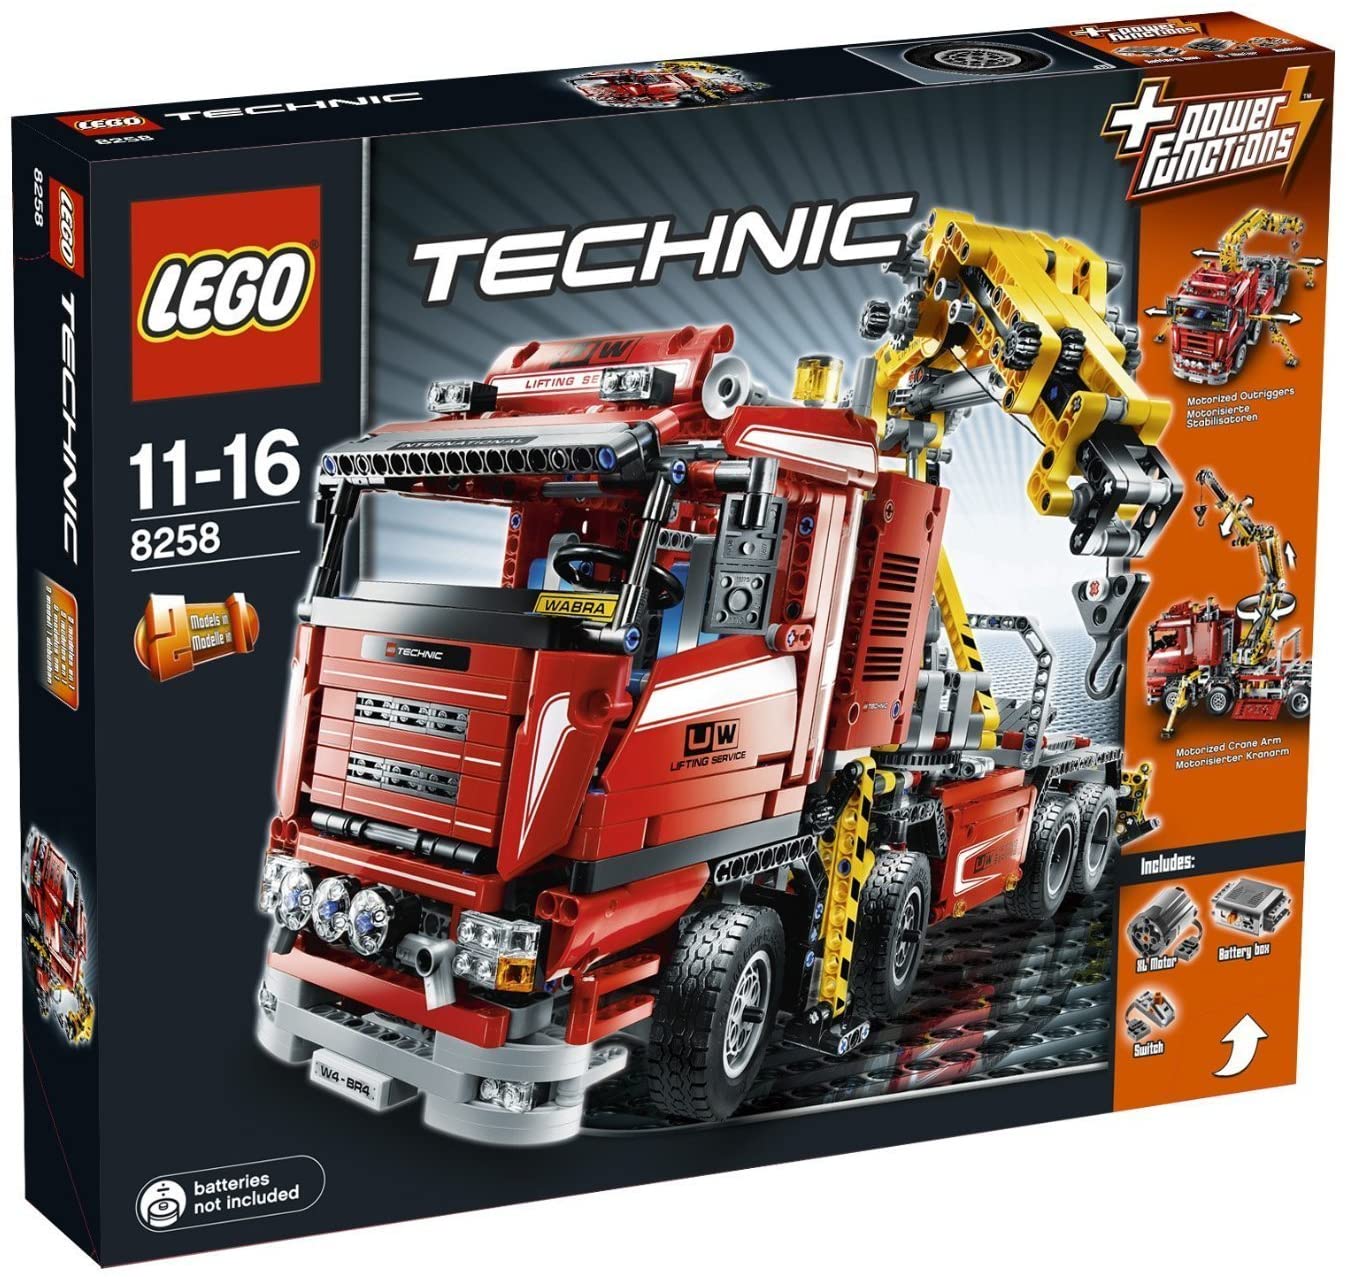 7 Best LEGO Crane Sets 2022 - Buying Guide & Reviews 6